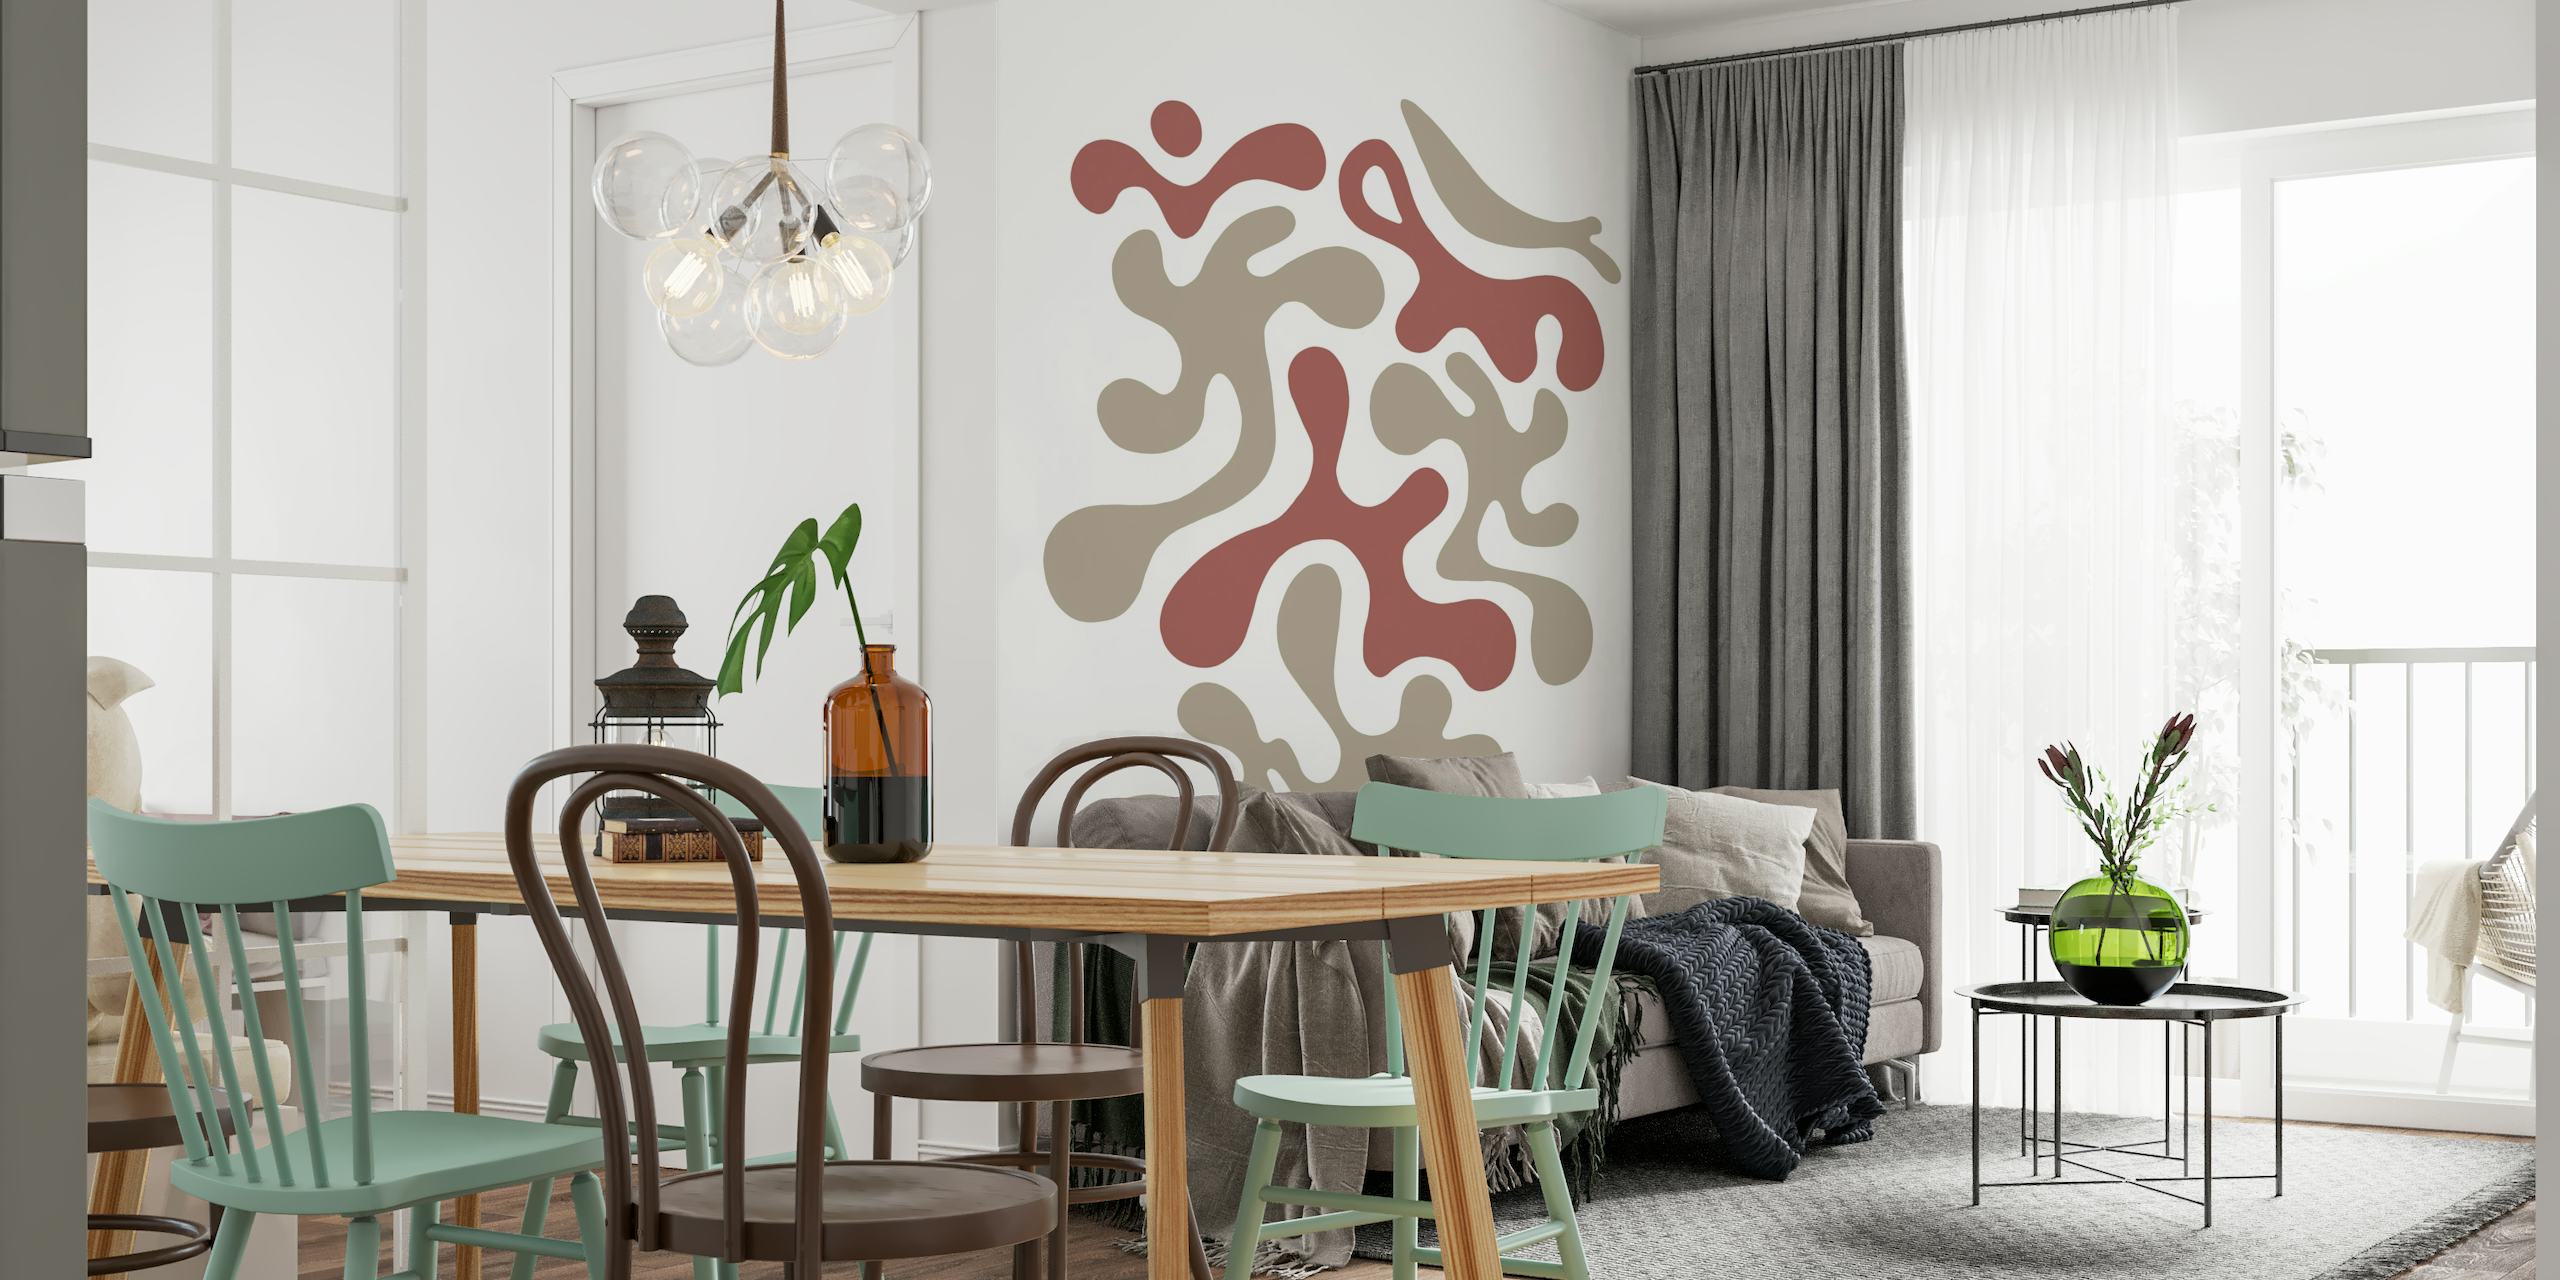 Abstract wall mural featuring organic shapes in terracotta and muted earth tones